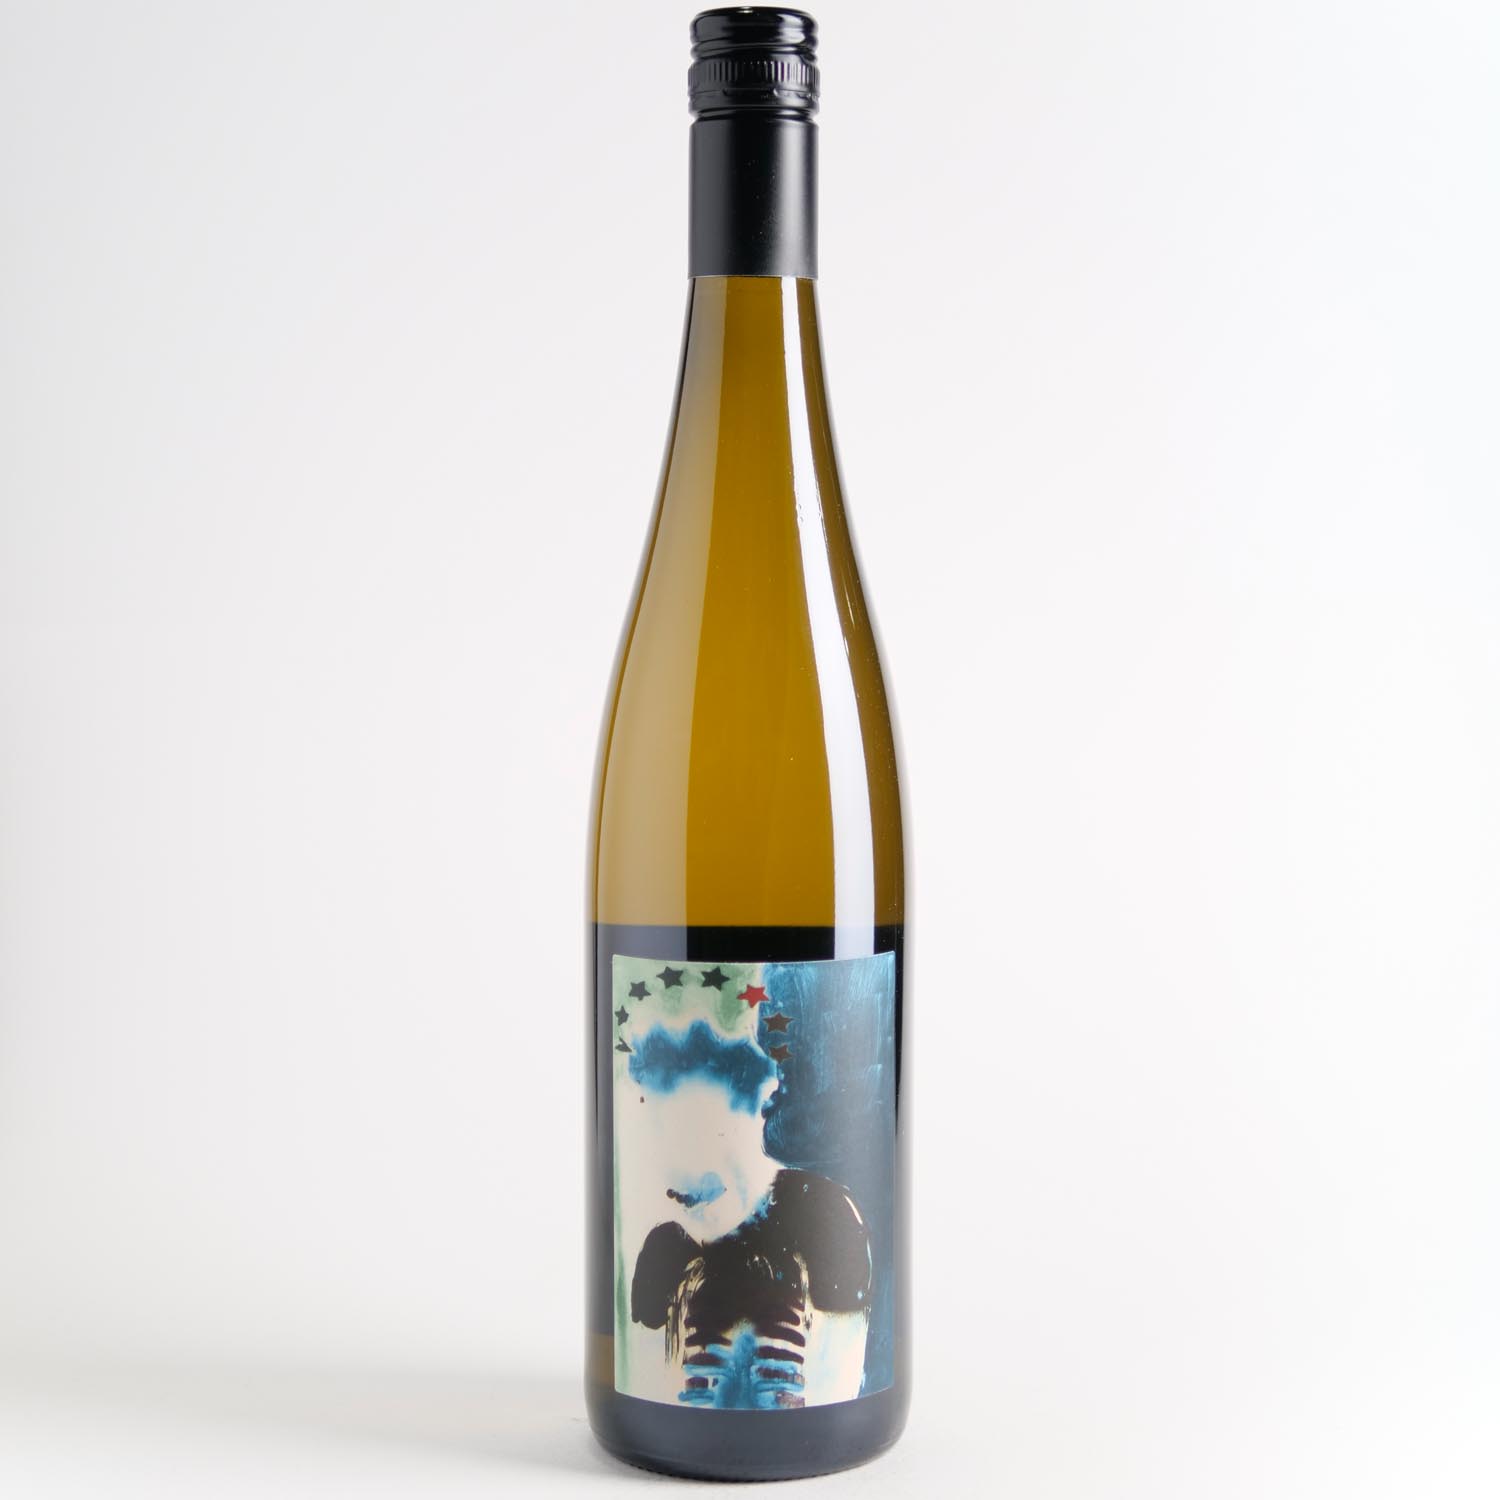 Dr Edge South Riesling 2020